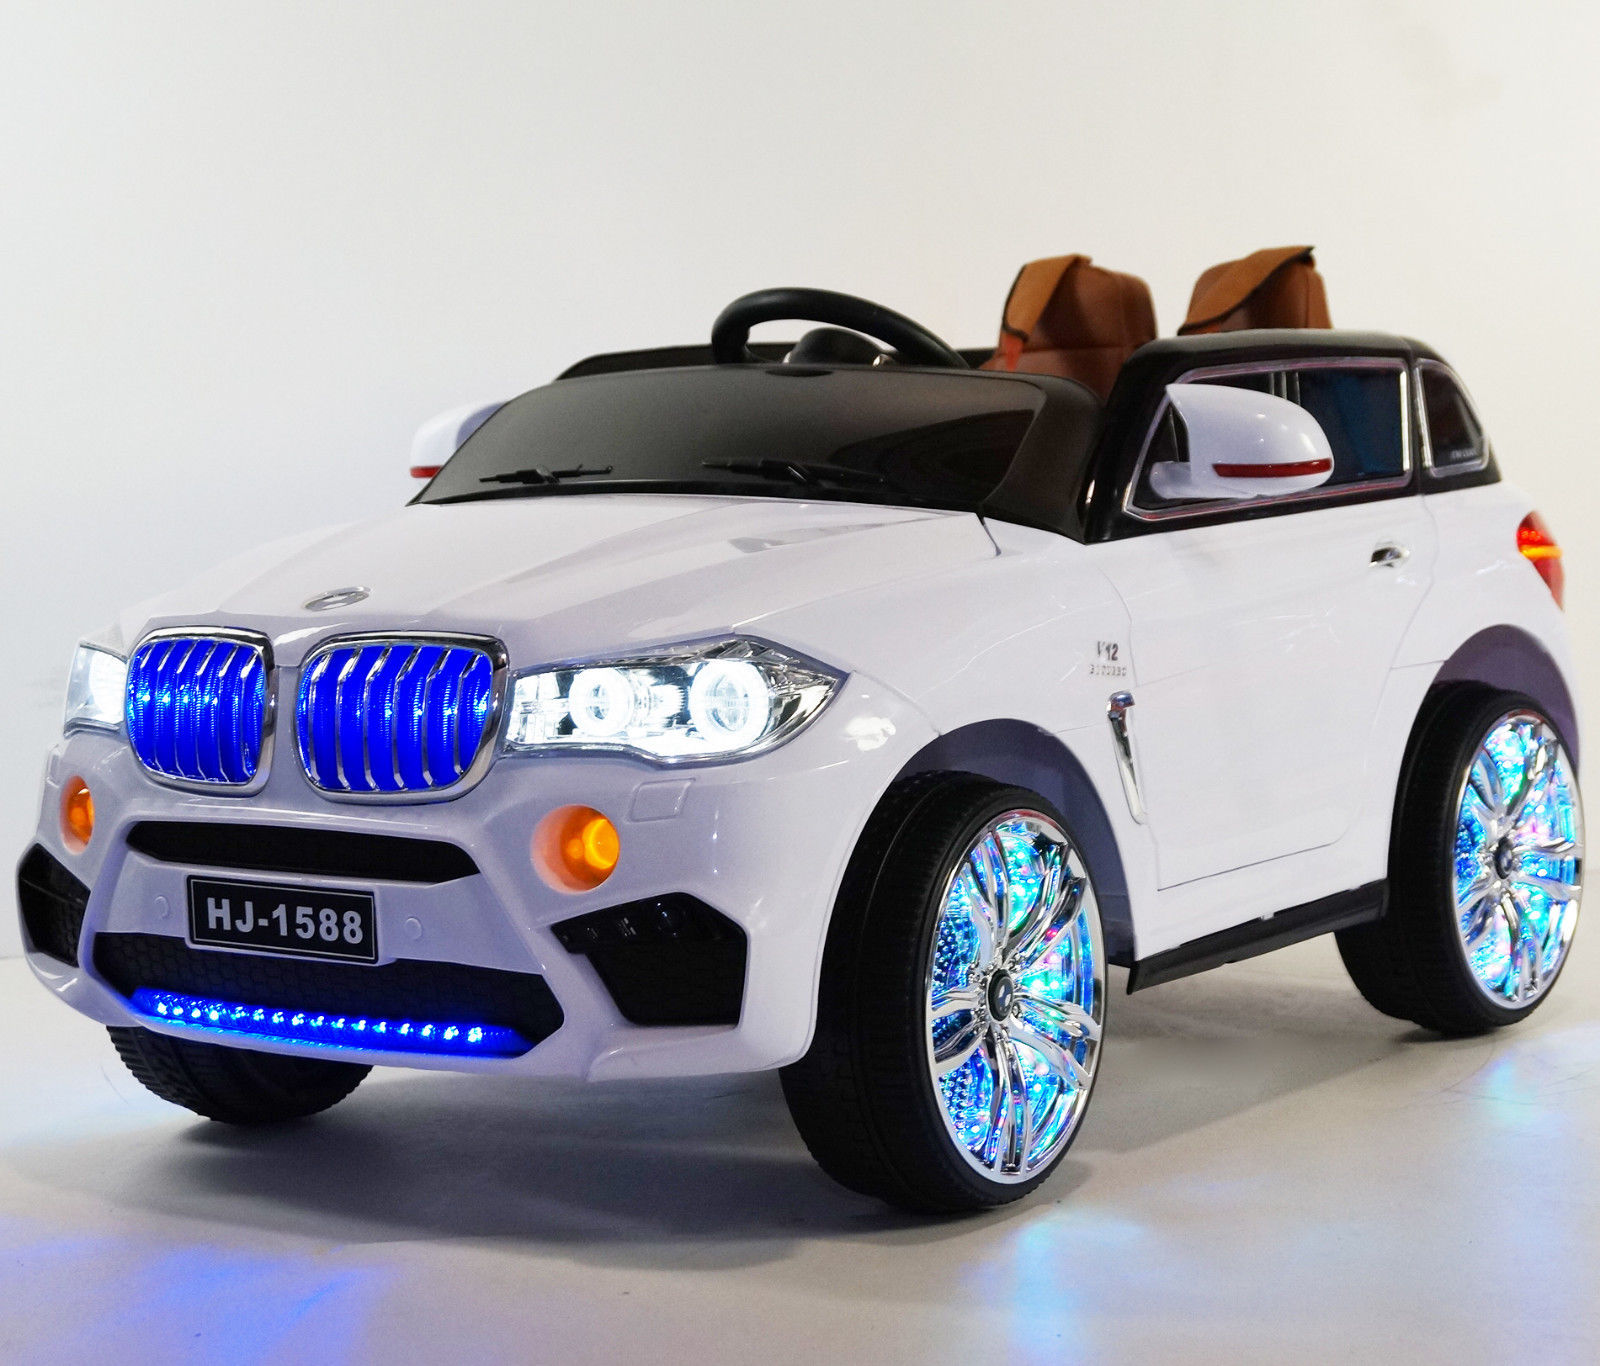 BMW X5 Style Ride On Toy Car for Kids With Remote Control Battery ...